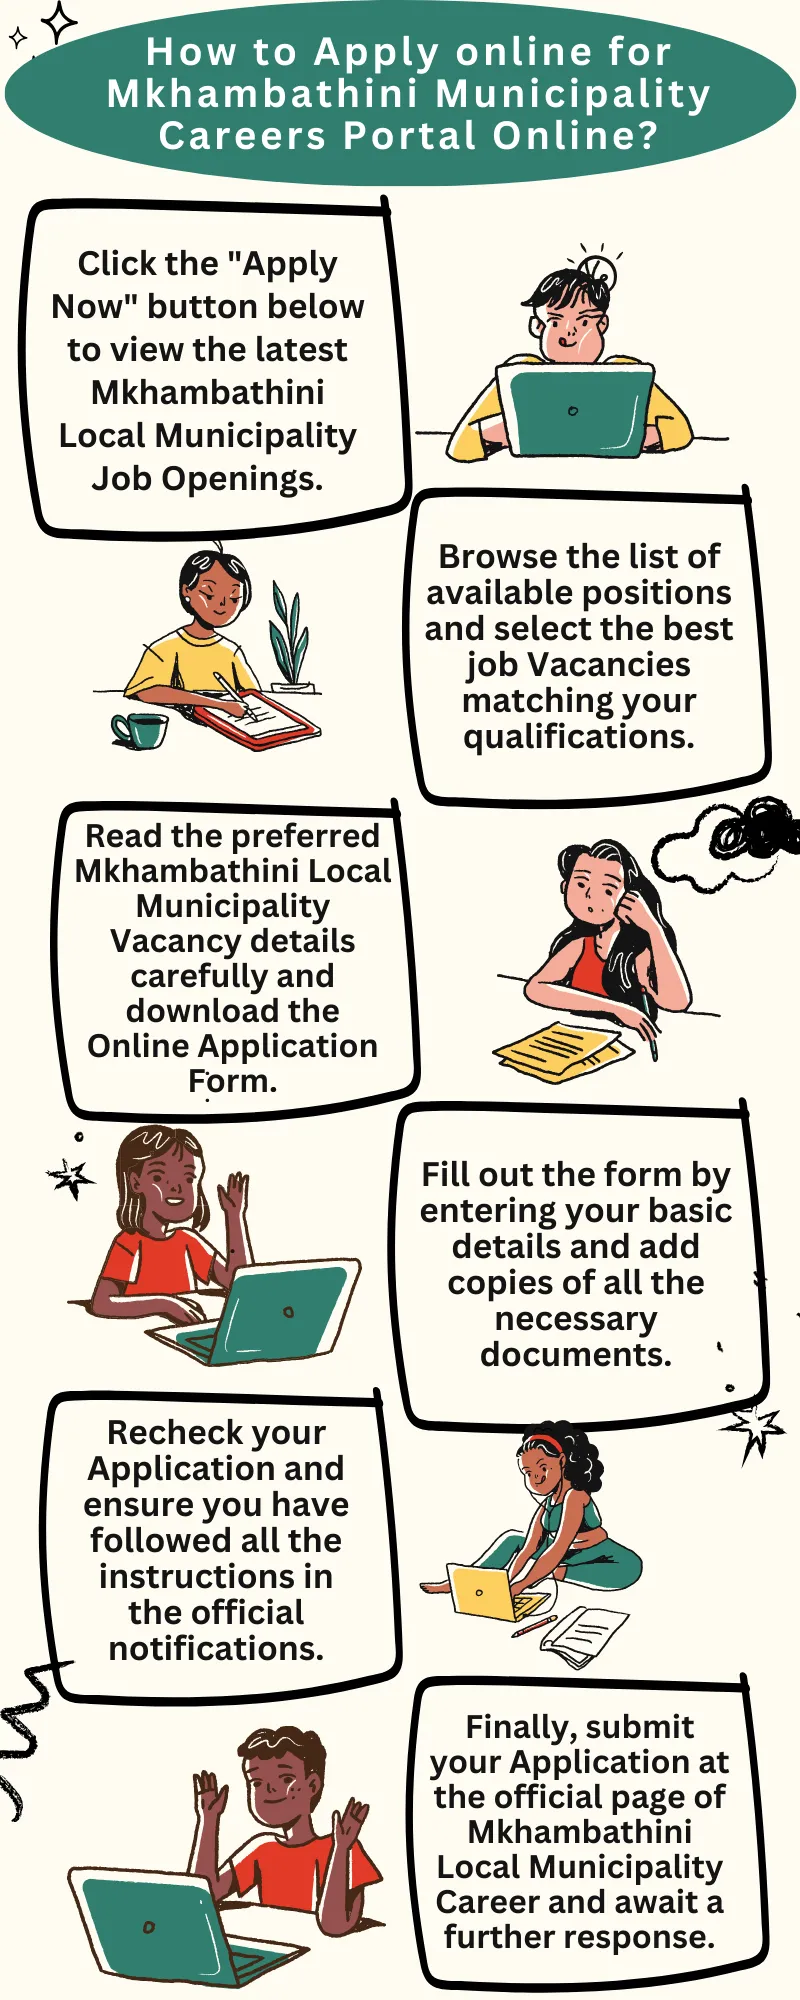 How to Apply online for Mkhambathini Municipality Careers Portal Online?